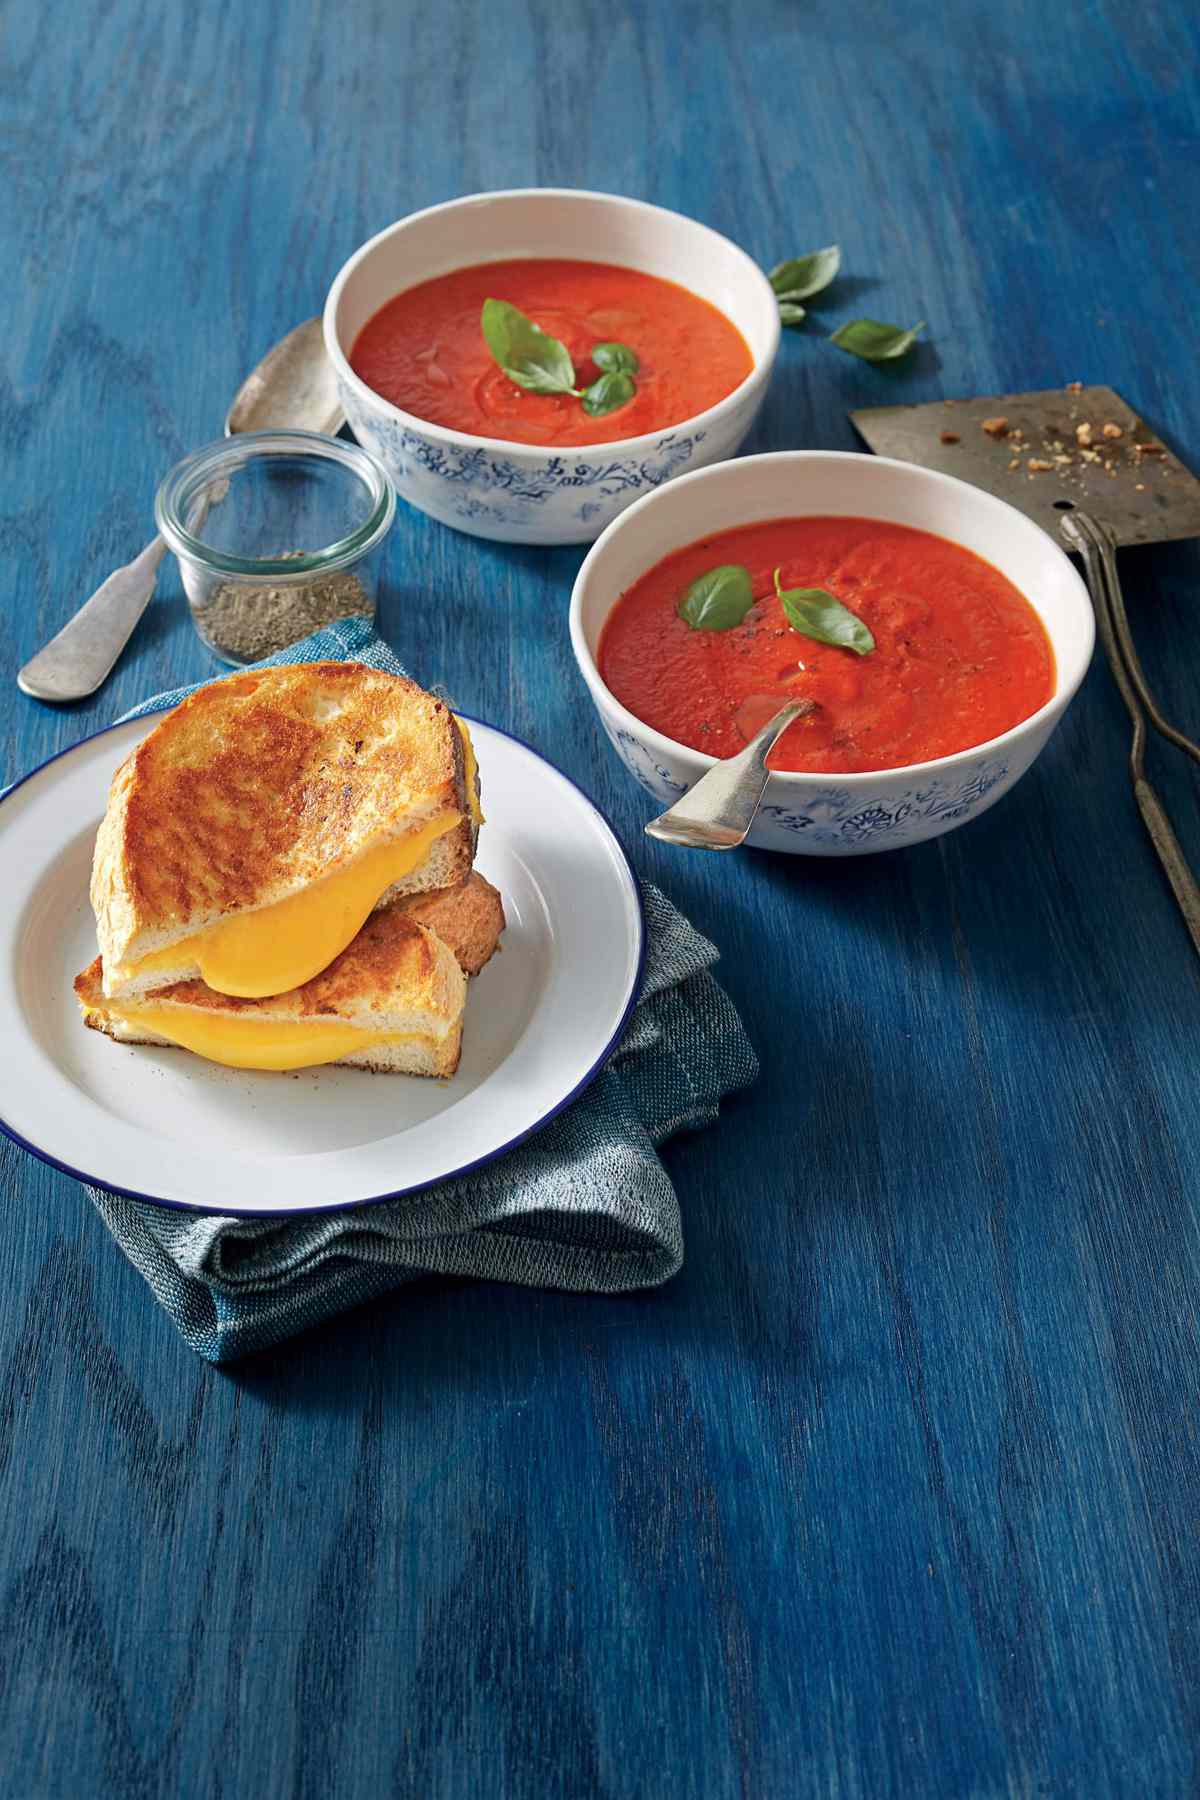 Tomato-and-Red Pepper Soup